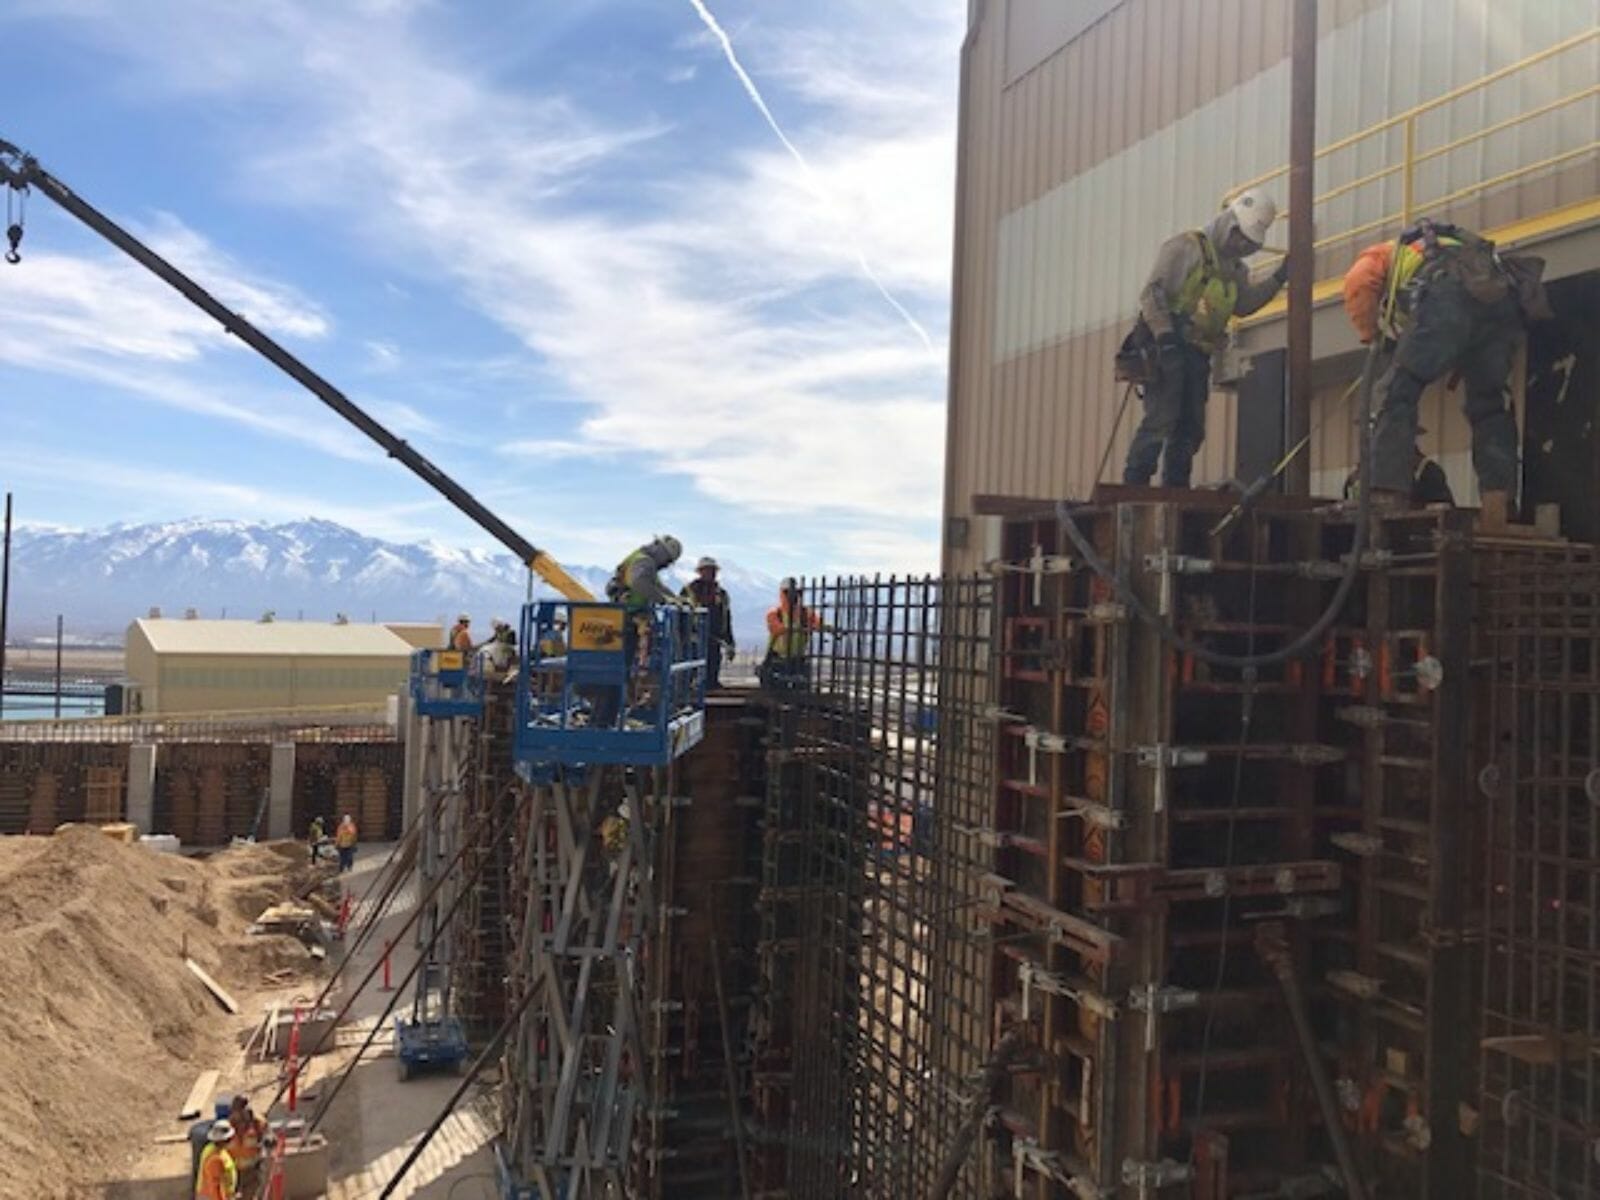 Preparing To Pour Industrial Concrete at Kennecott Mine in Salt Lake City, UT | Bingham Canyon Mine | Wollam Construction